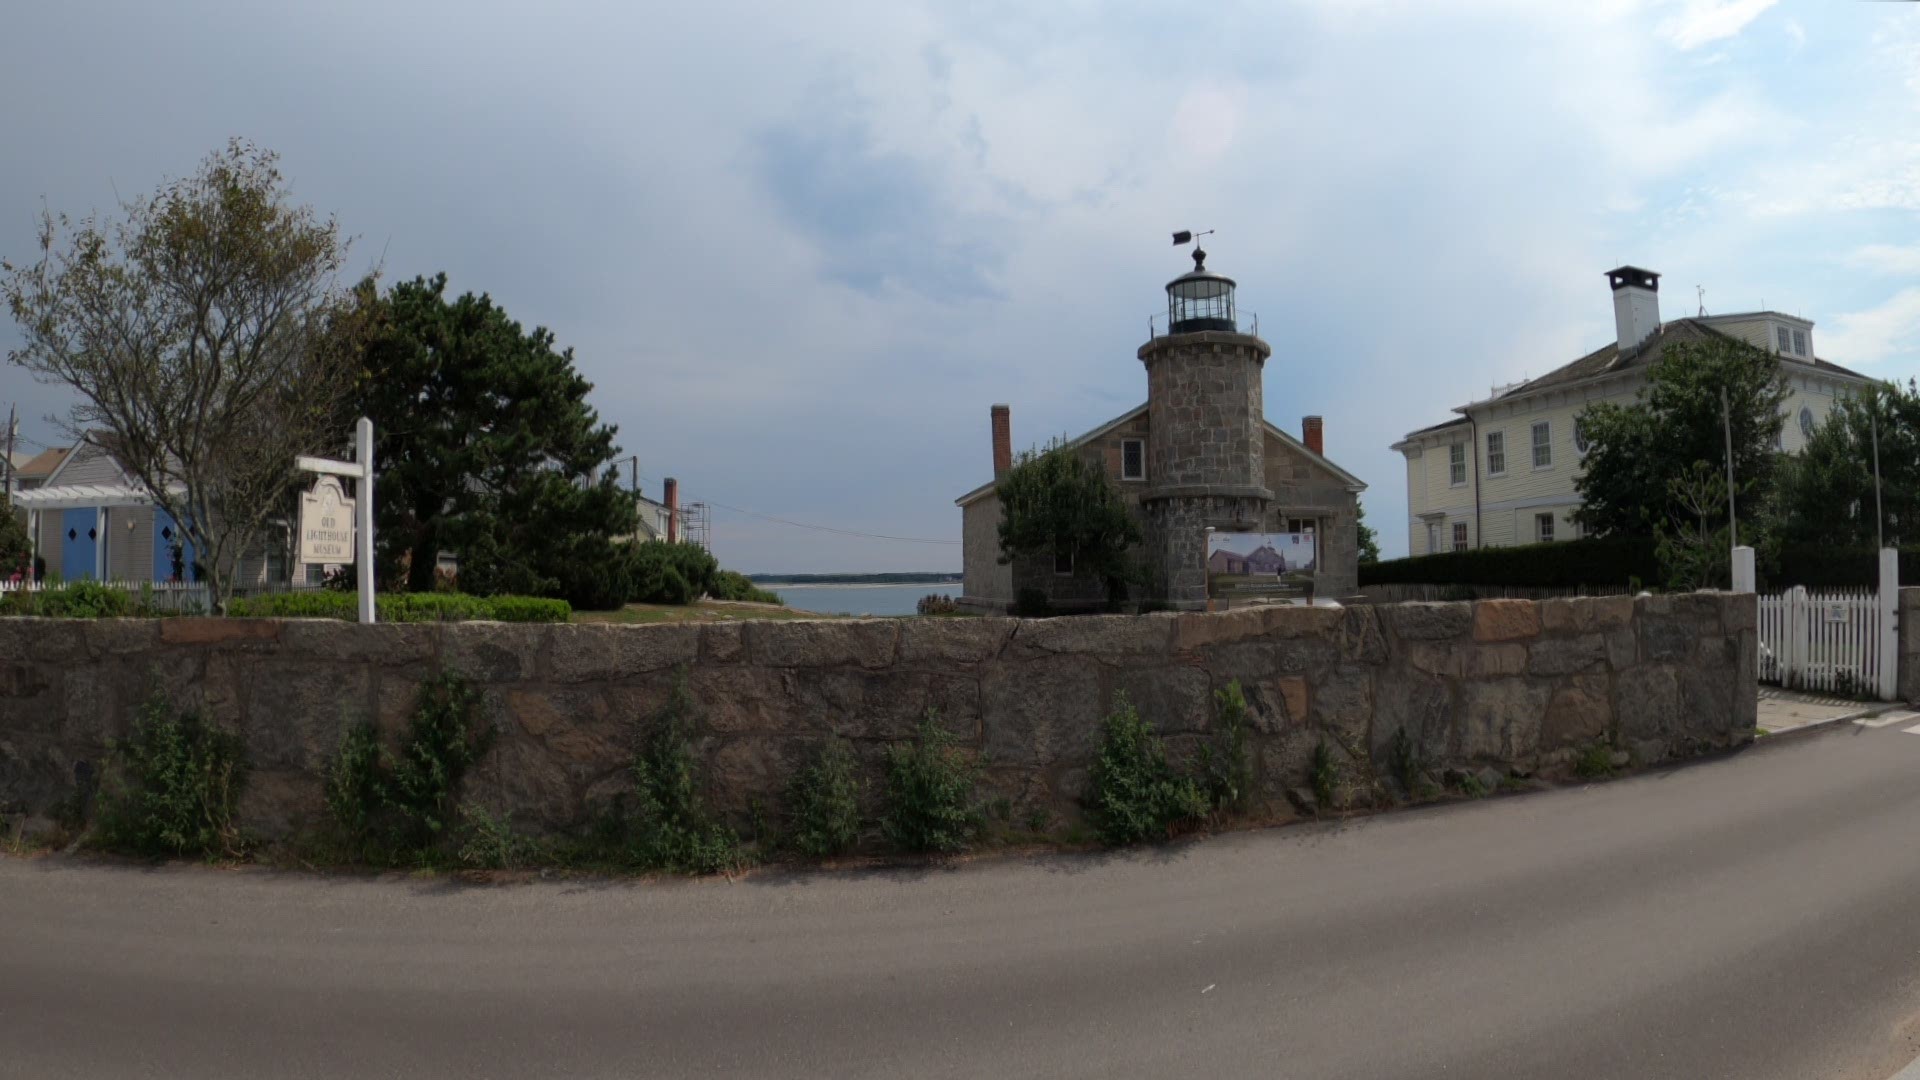 Museums around the country are struggling in the midst of the Covid-19 but the Stonington Historical Society made the decision to open the lighthouse doors again